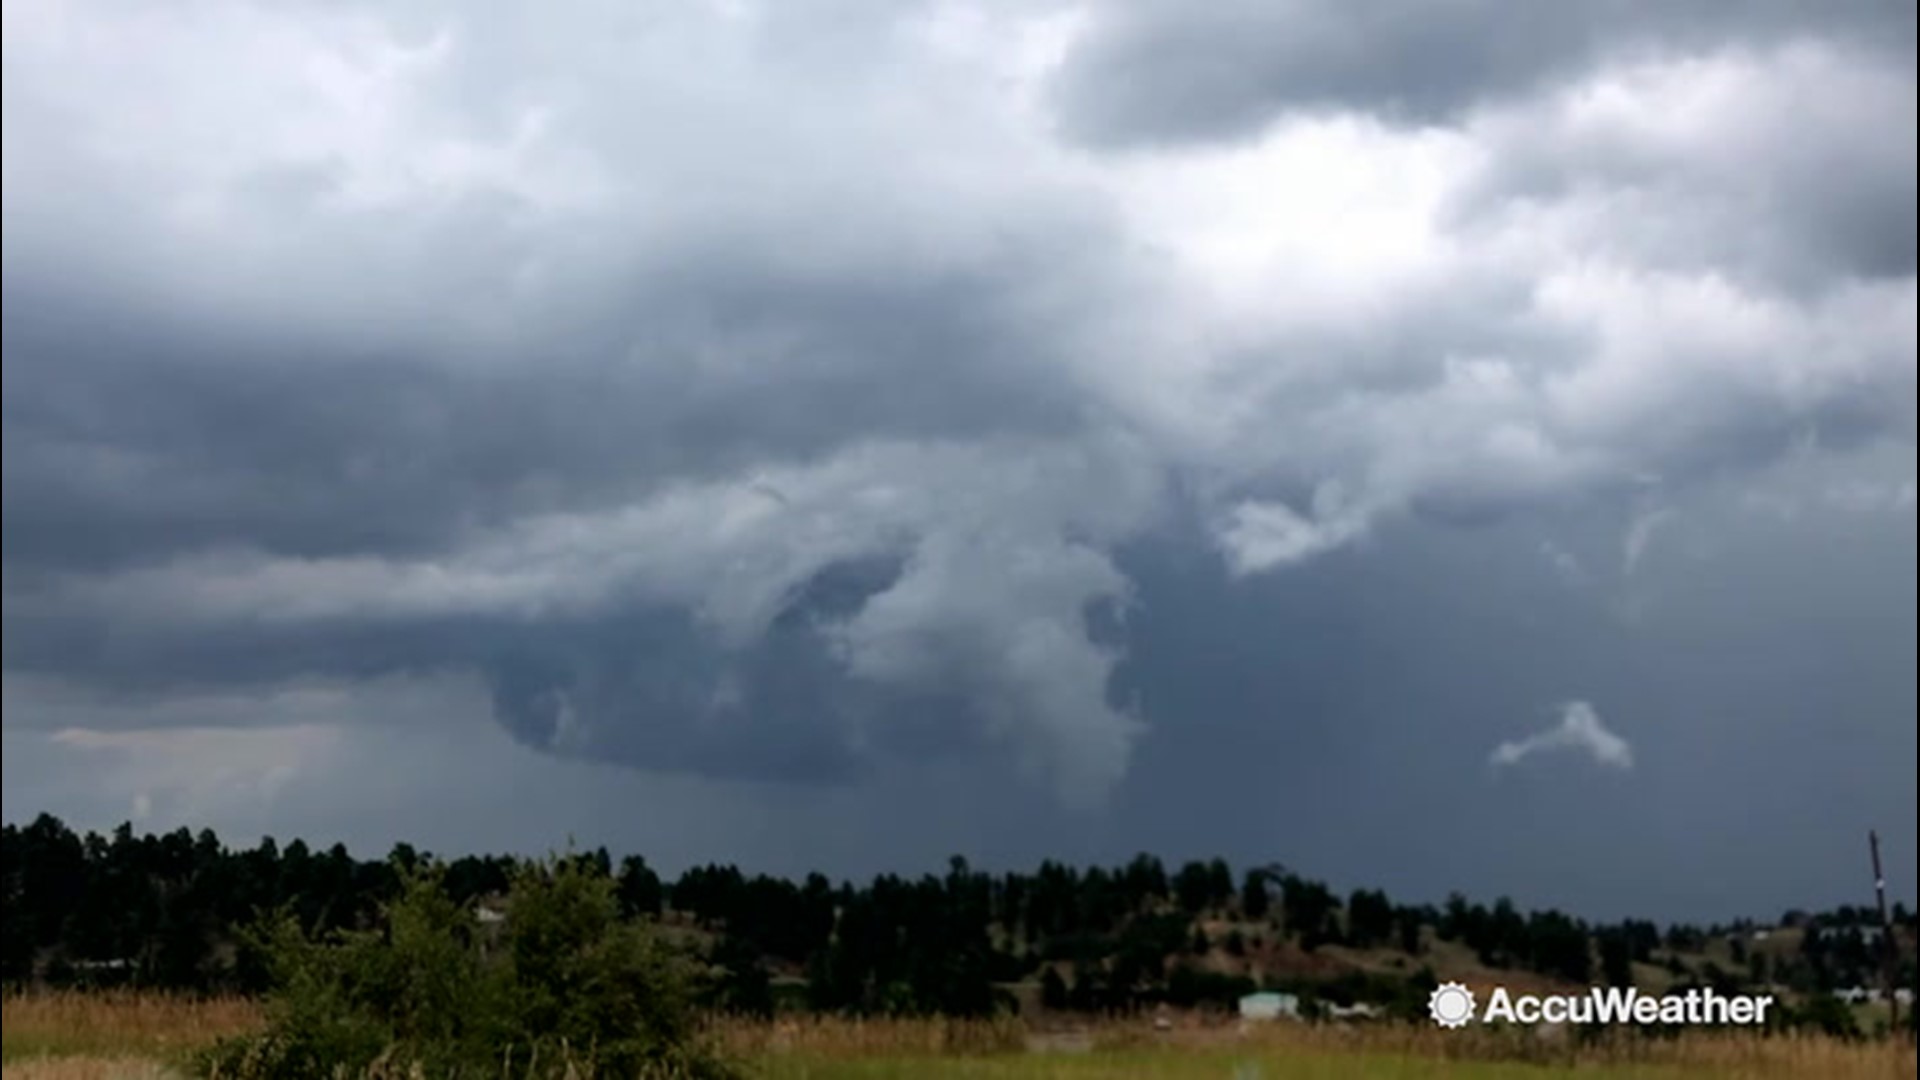 A dangerous storm carrying hail, rain and lightning slowly moved over Denver and caused dangerous flash flooding, on Aug. 22.